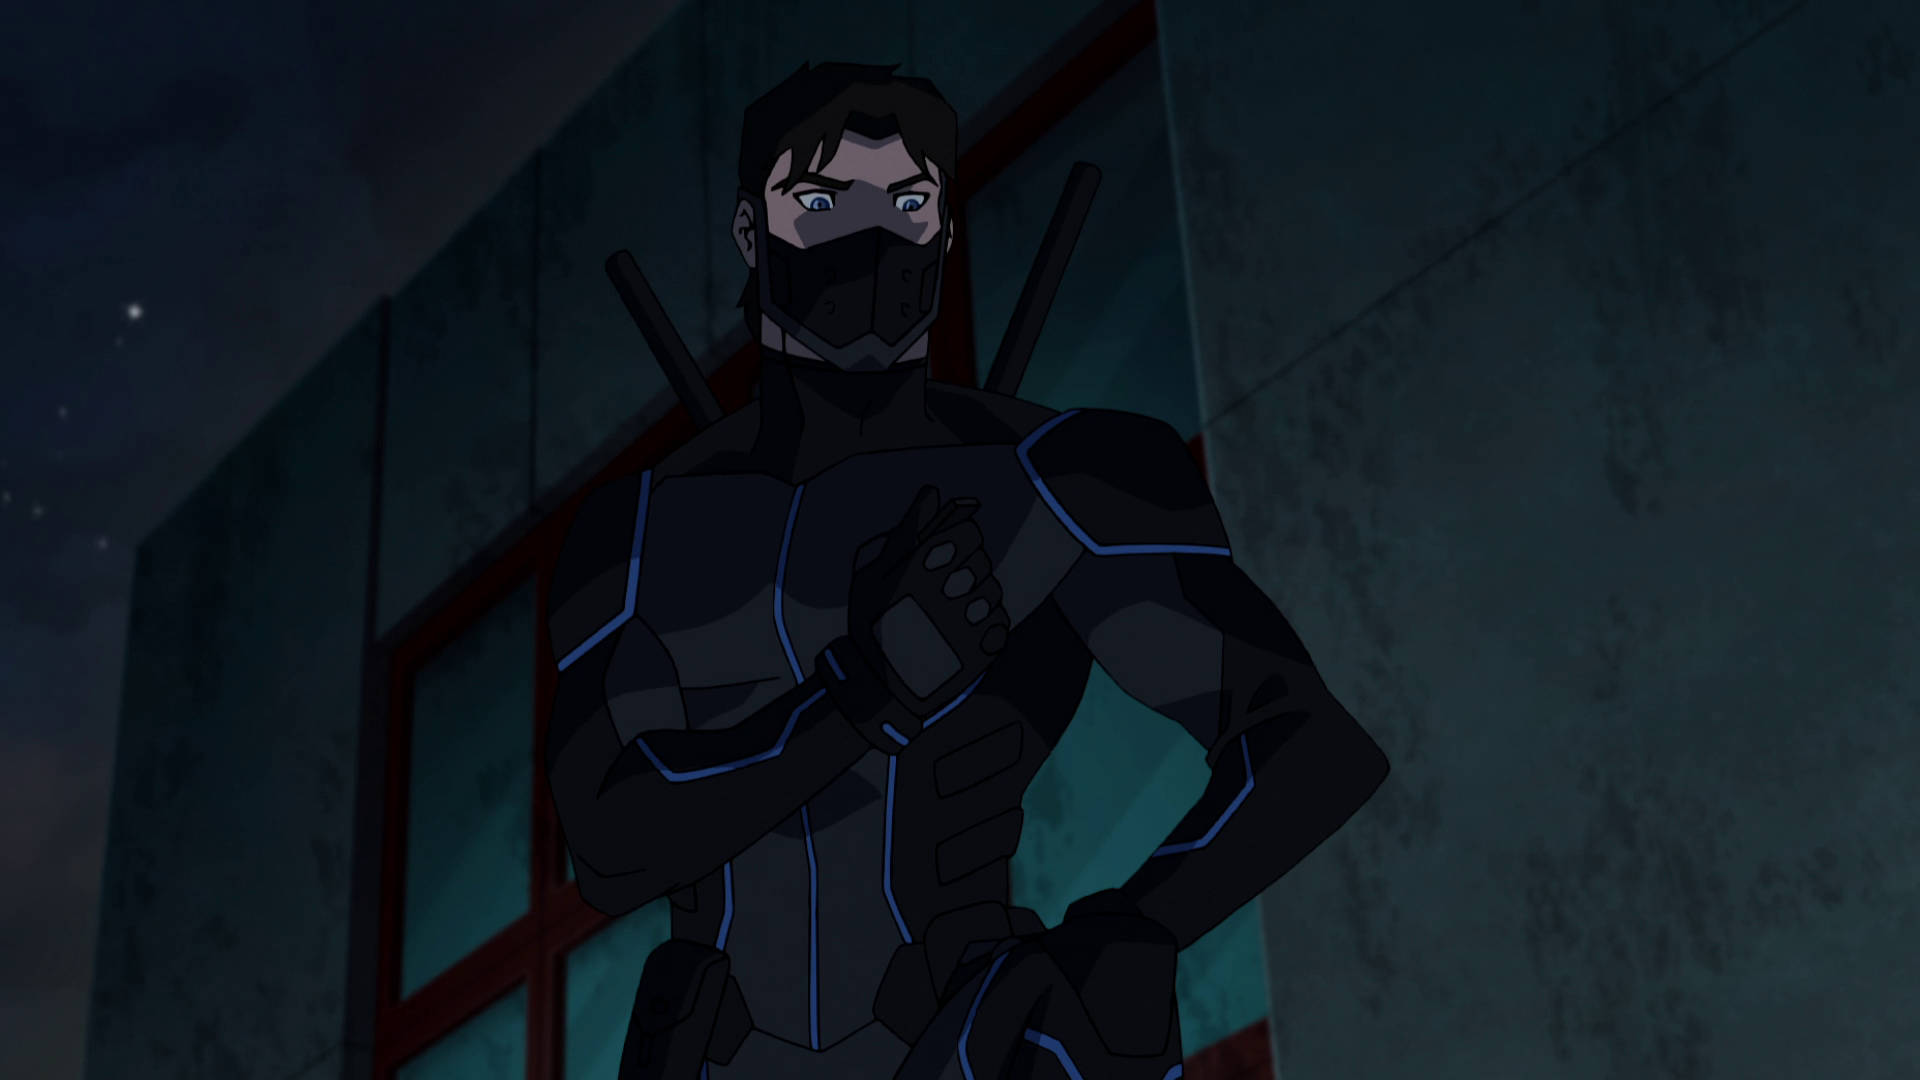 Unge retfærdighed Nightwing Stealth Suit tapet Wallpaper